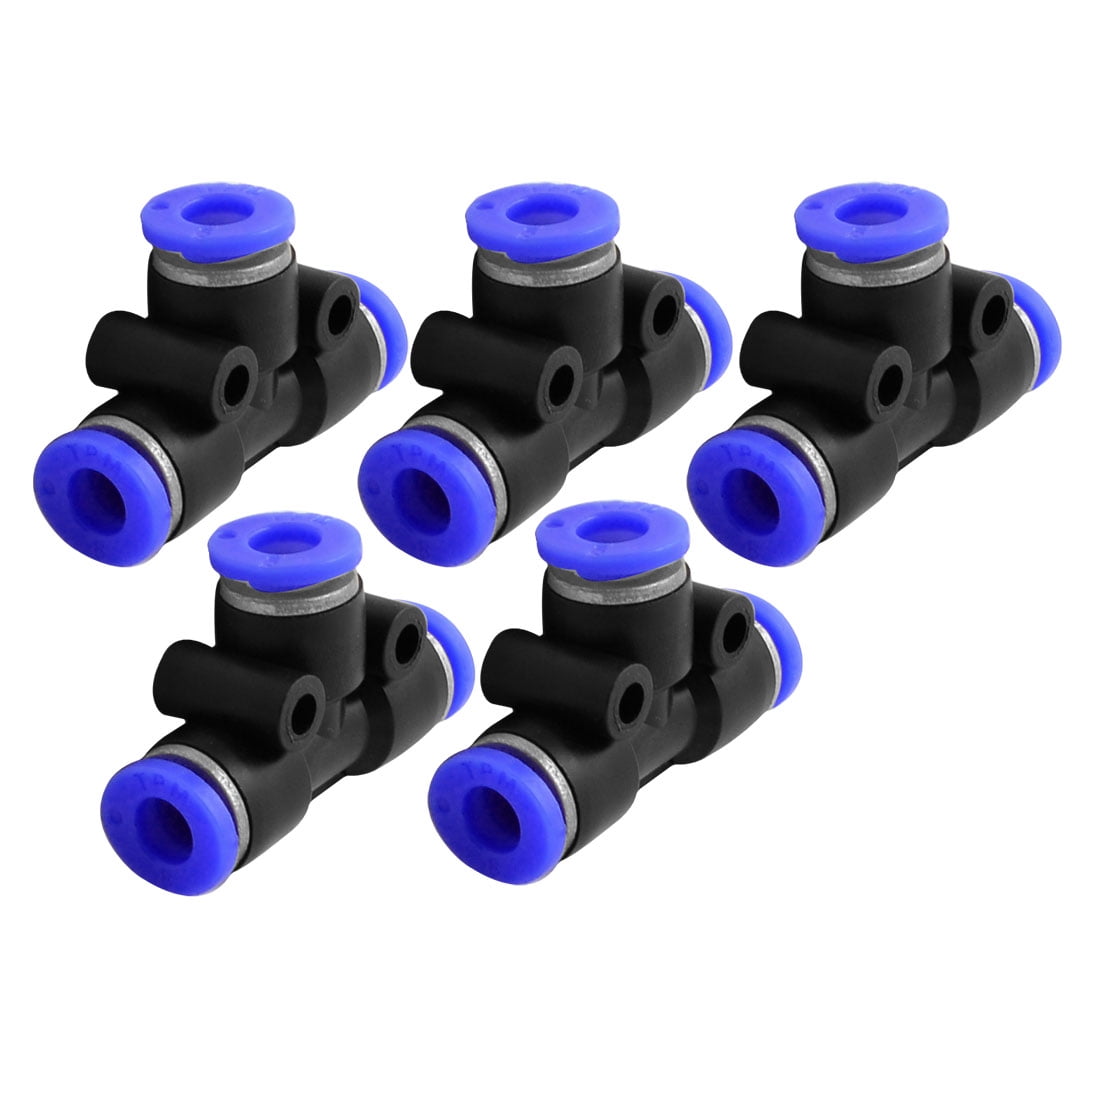 5 Pcs Air Pneumatic Tee Adapters Connectors Fittings 6mm to 6mm 